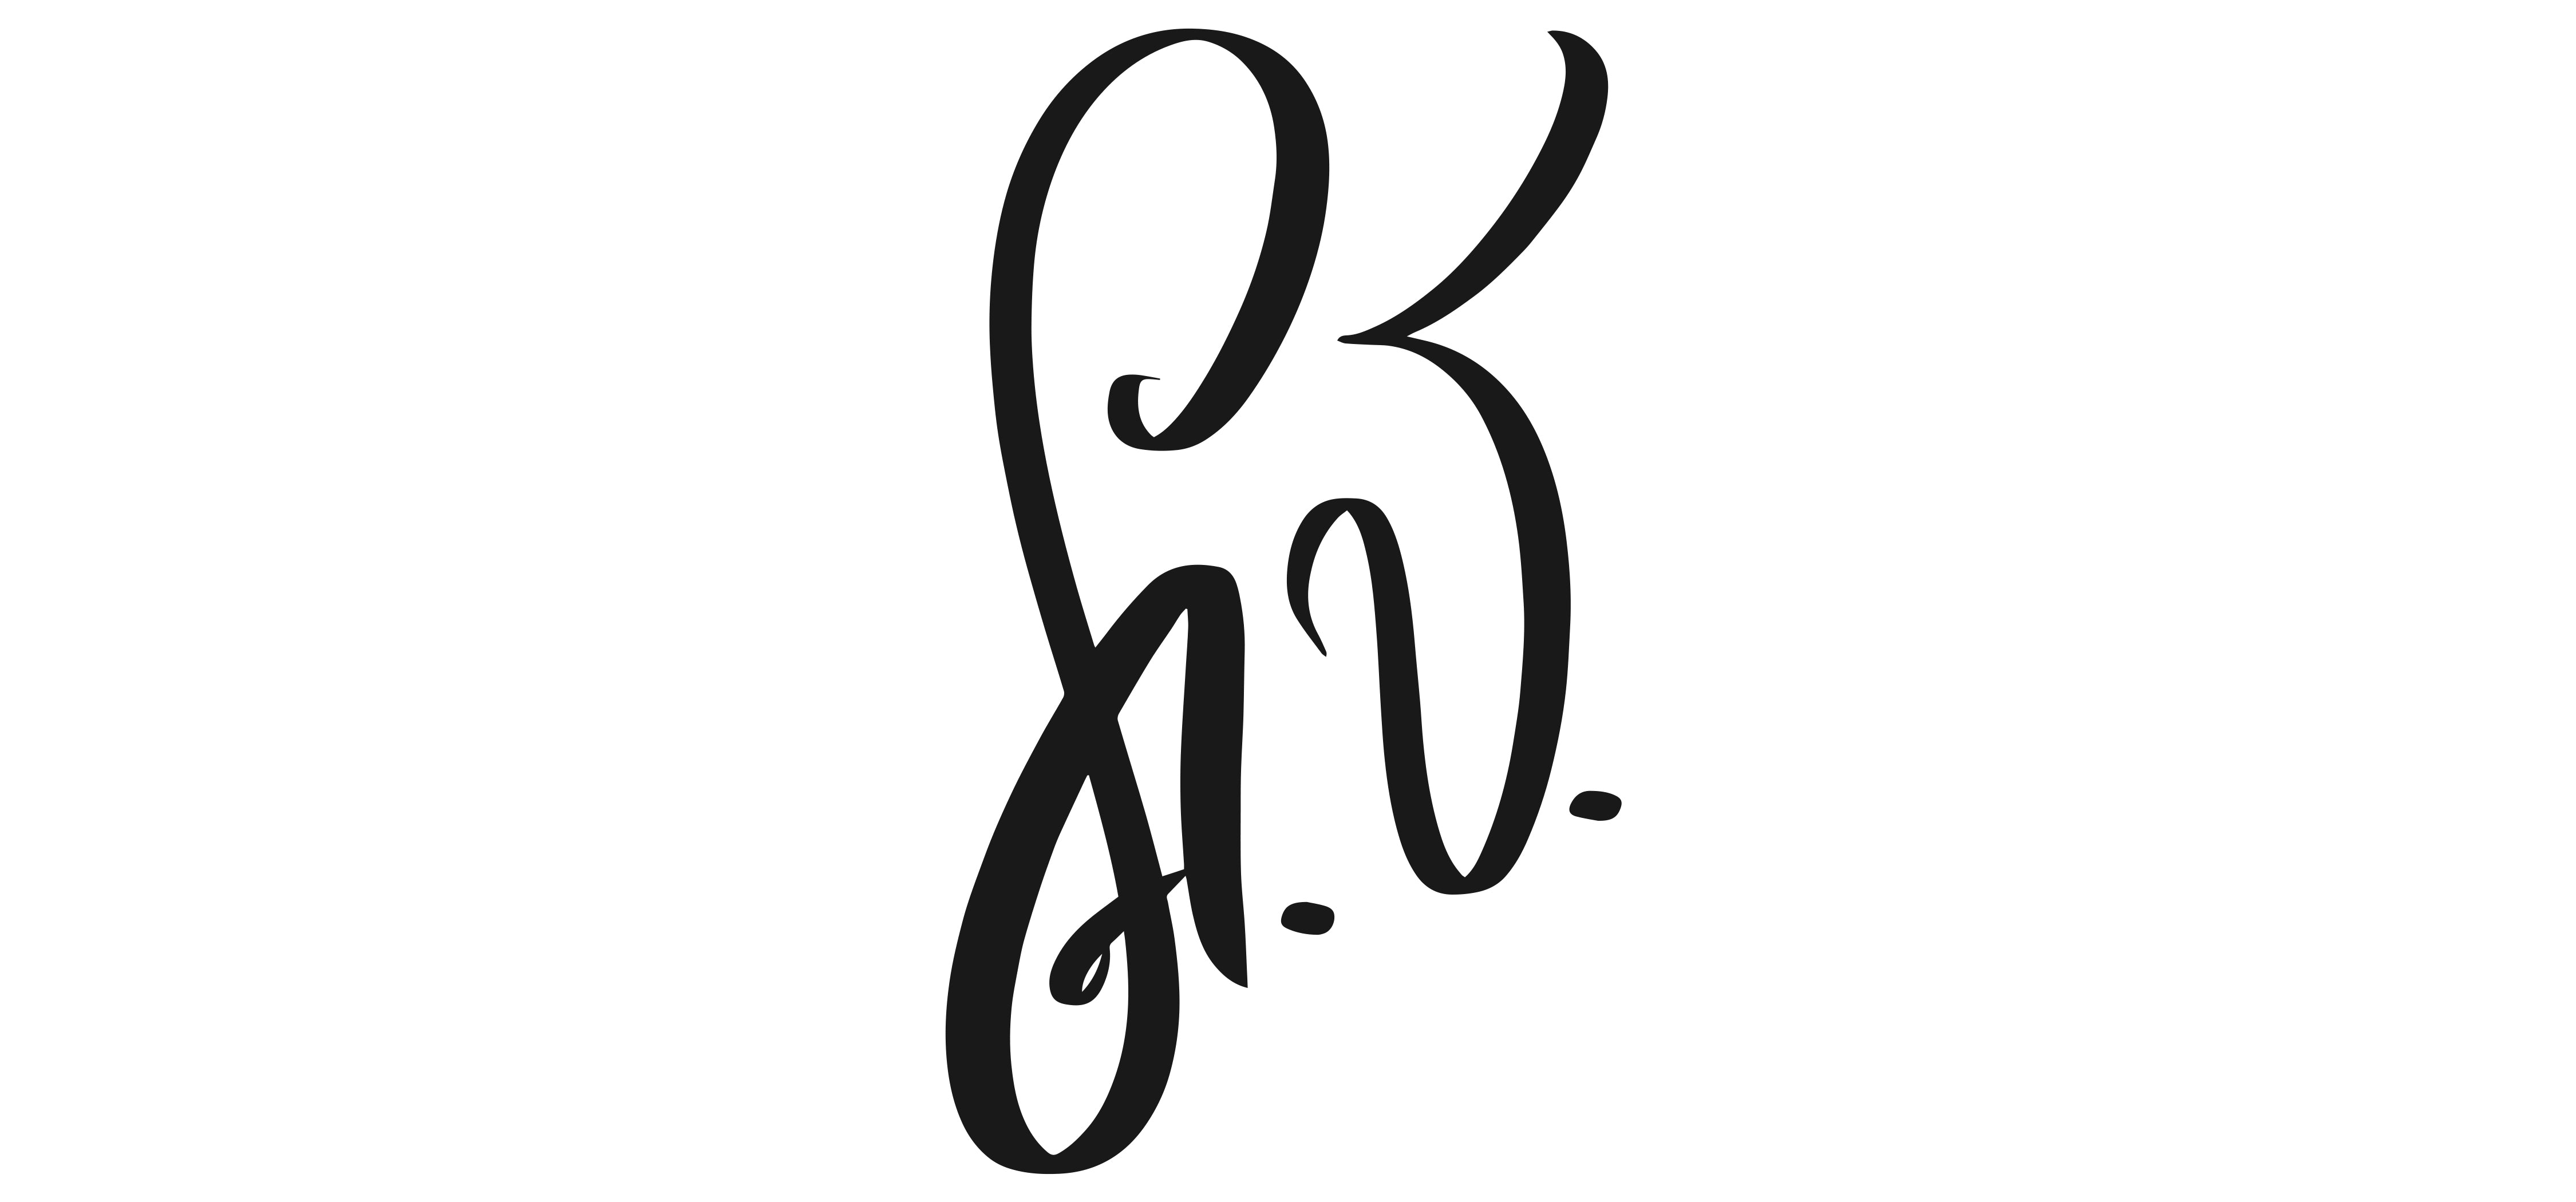 If you see someone who signs with just their initials, they’re probably a very private person. After all, if they don’t even want to reveal their name through their signature, there’s probably a lot about them that they only keep to themselves.